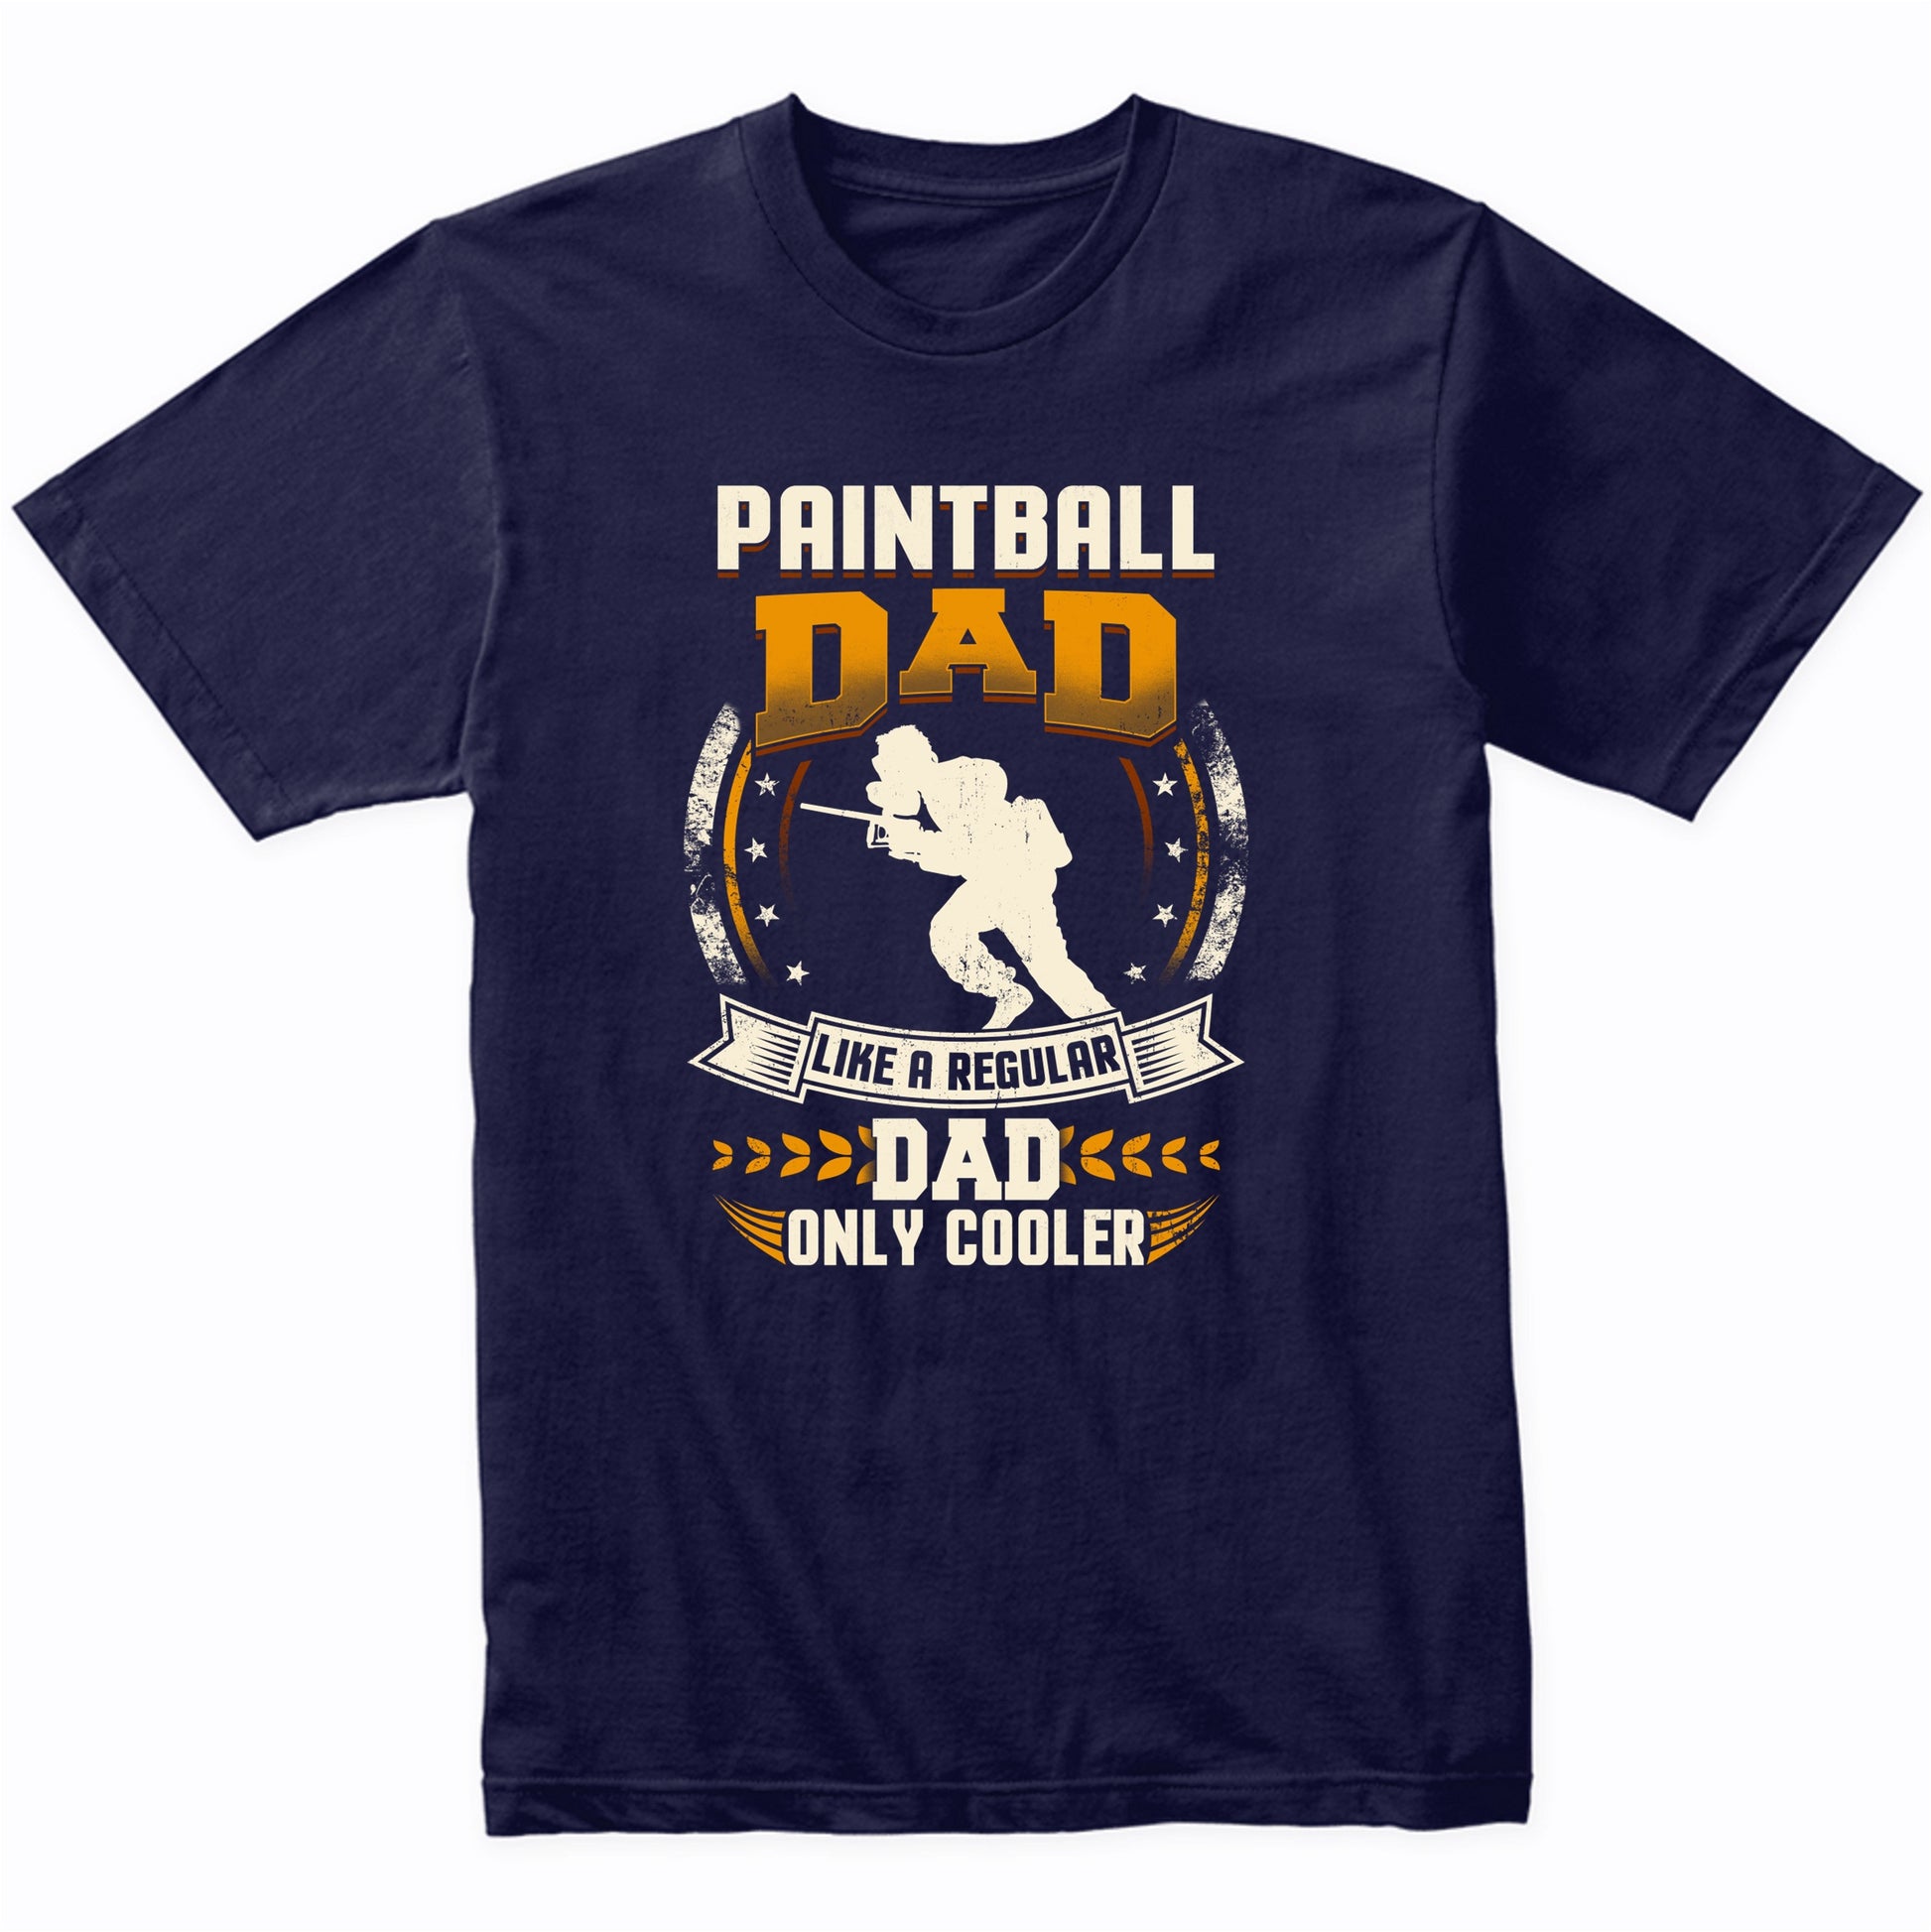 Paintball Dad Like A Regular Dad Only Cooler Funny T-Shirt